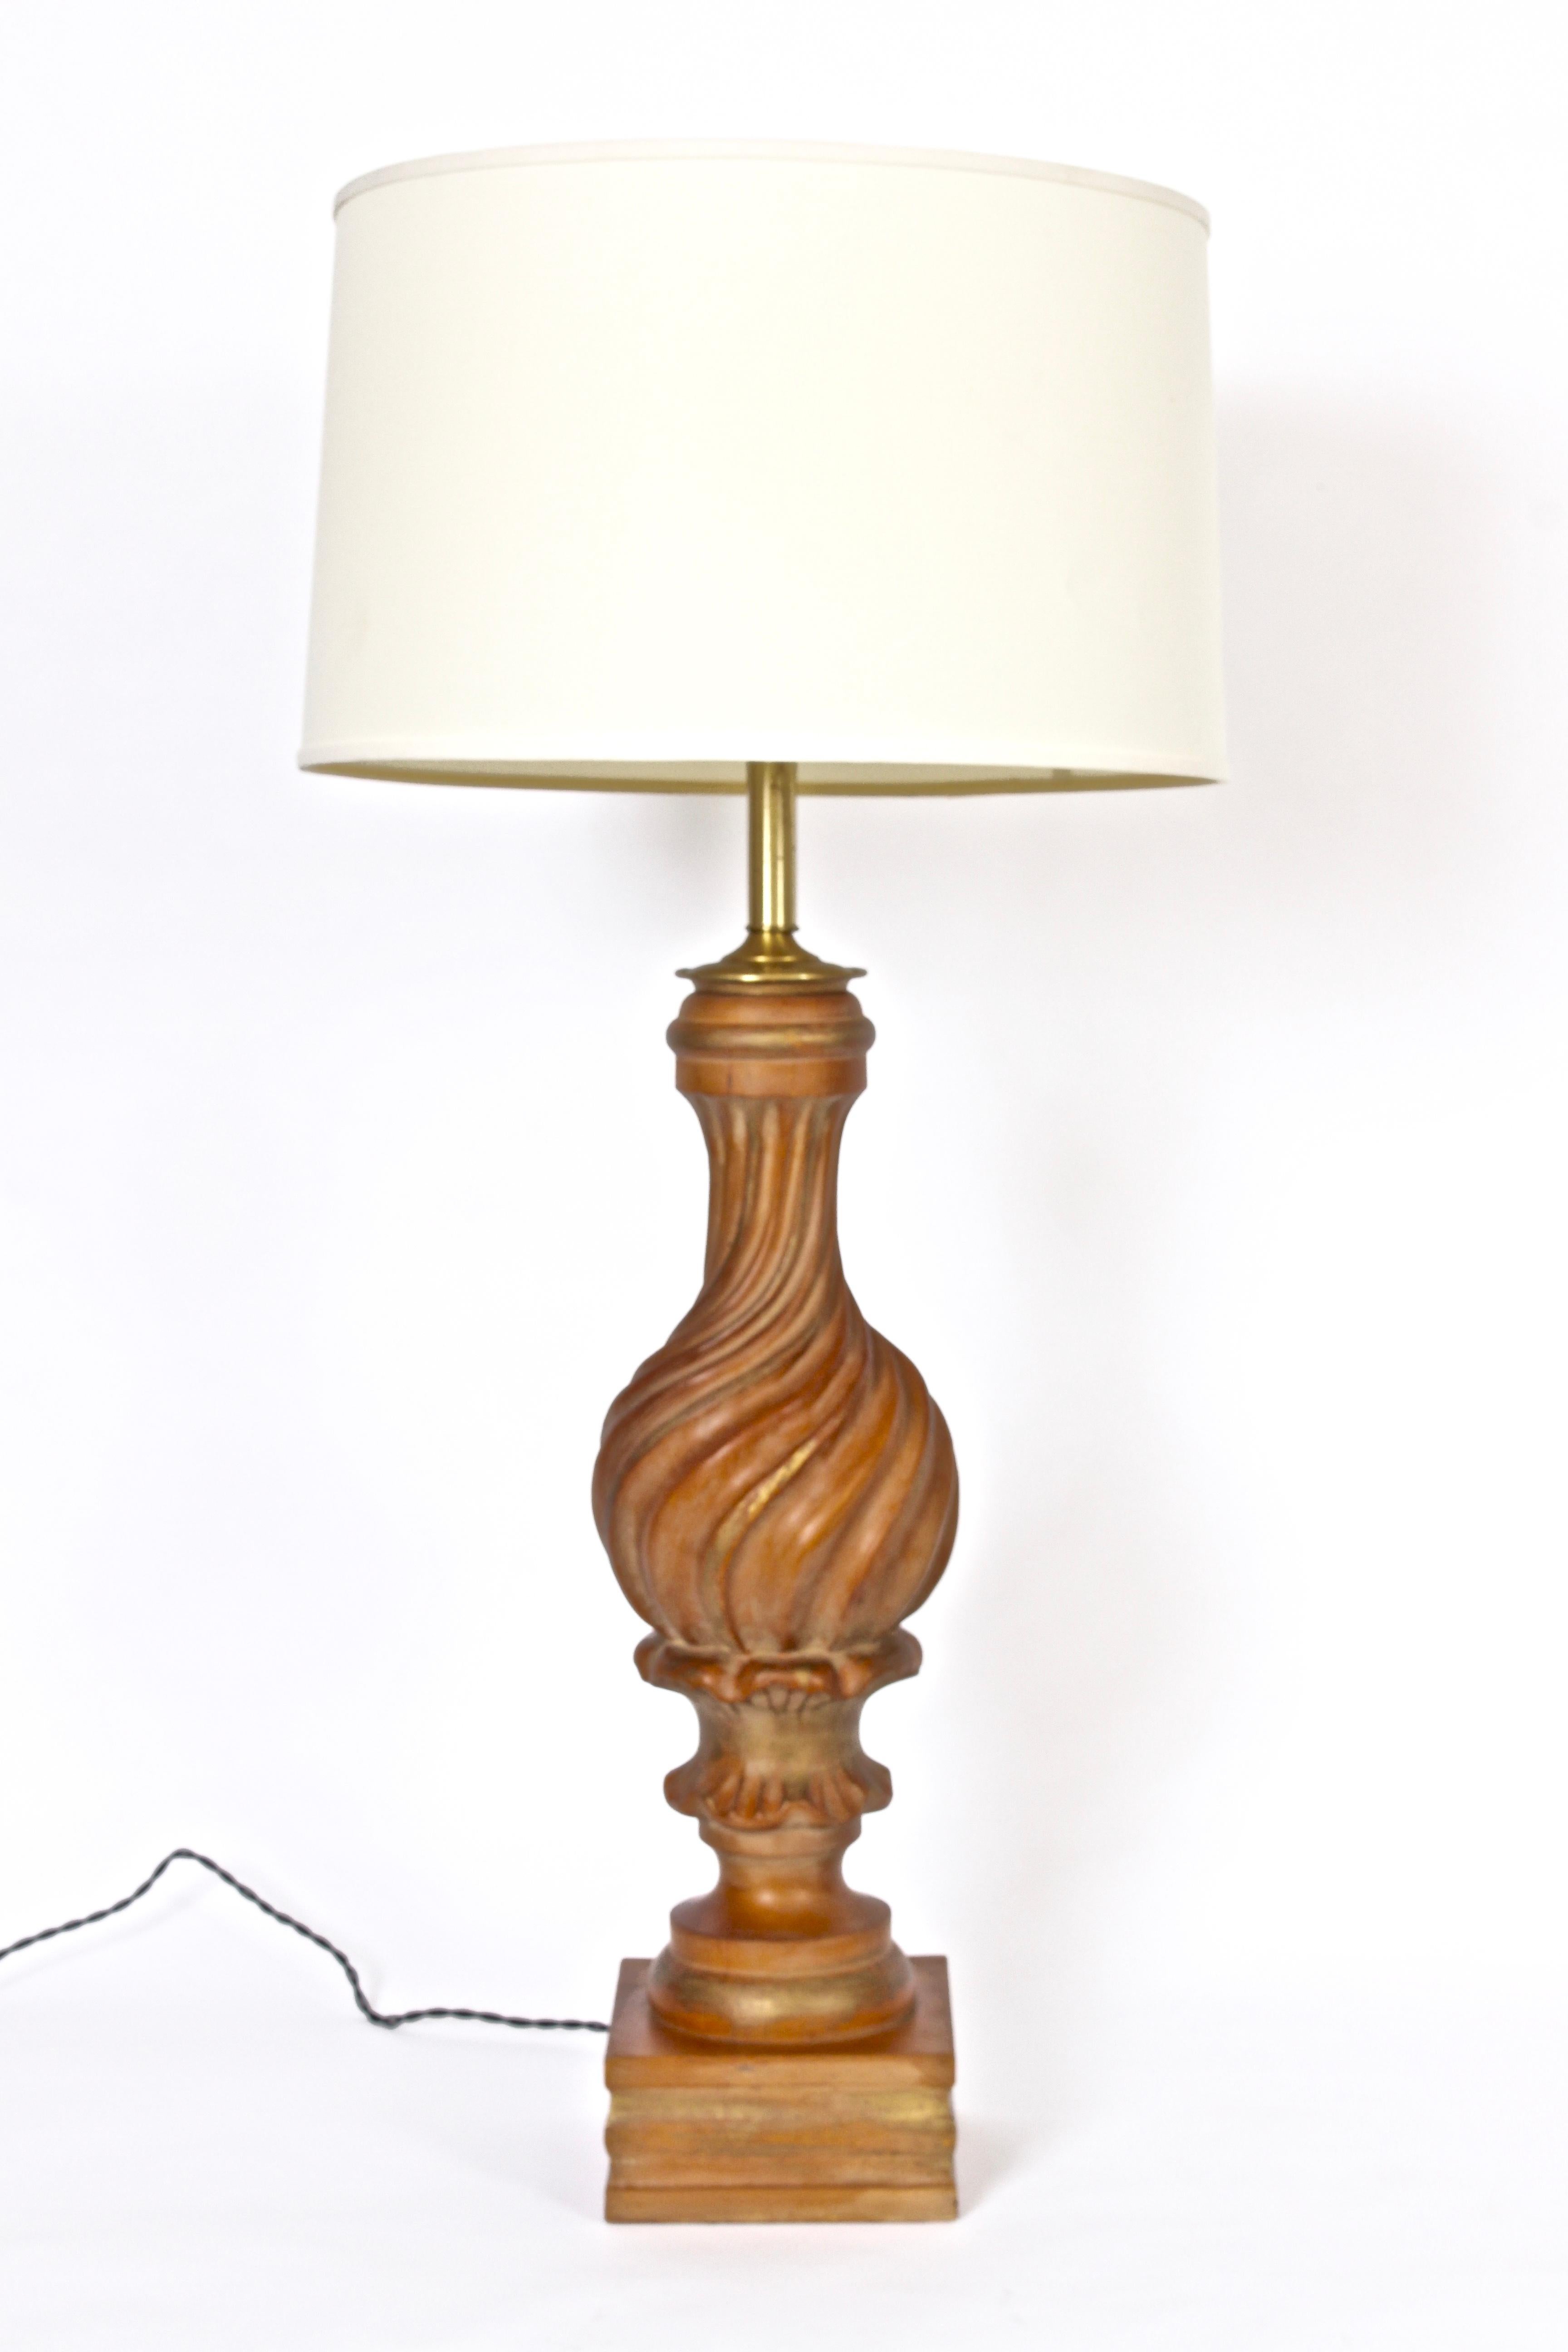 Substantial Italian hand carved Giltwood Table Lamp by Marbro Lamp Company, circa 1960.  Featuring handcrafted swirled wood body lightly striped in gold. On block base. Small footprint. Shade shown for display only and not for sale (11H x 17D top x